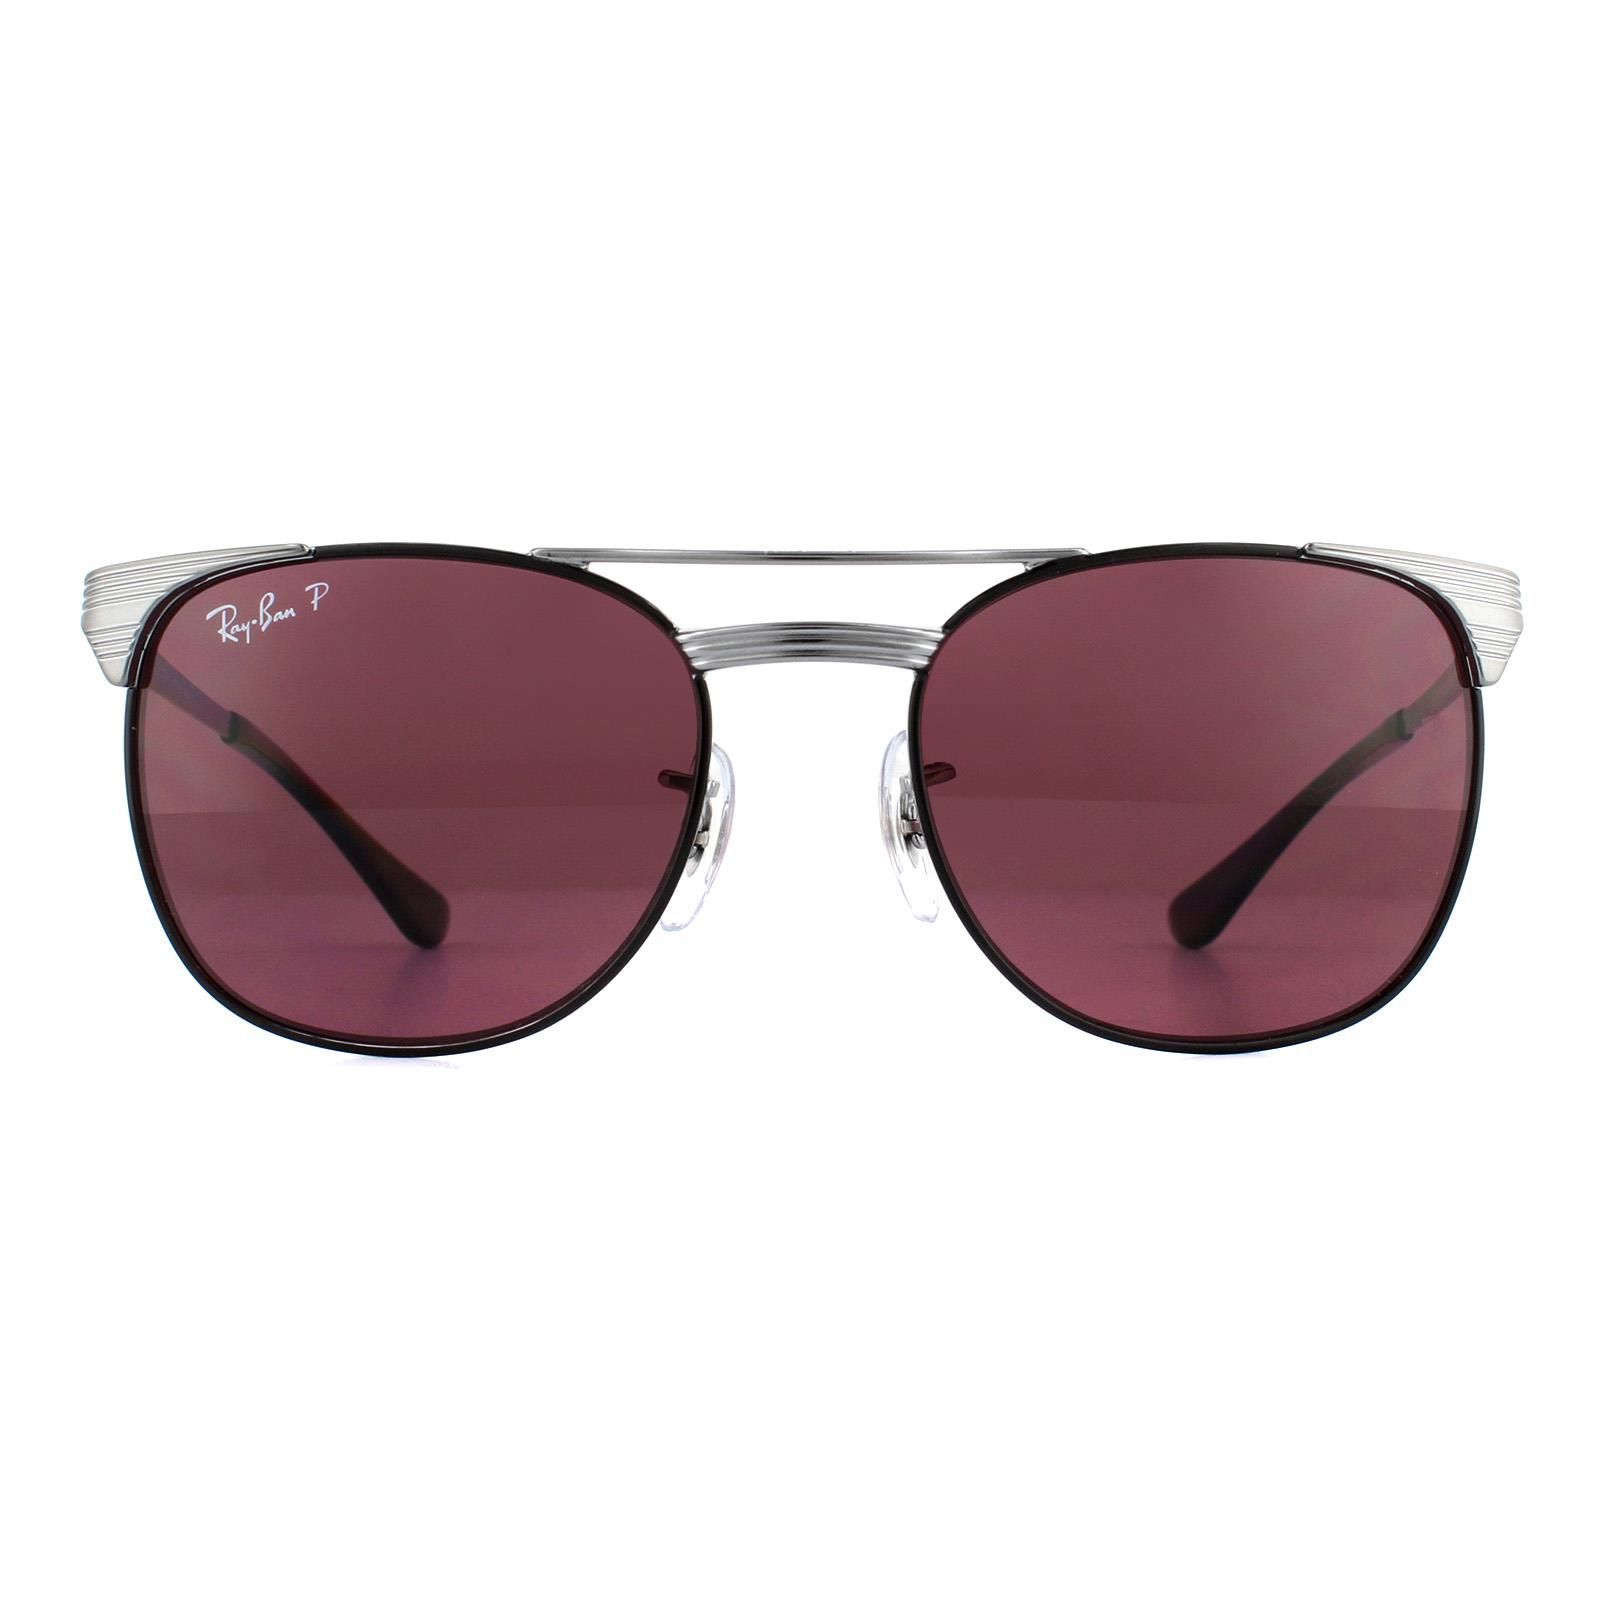 Ray-Ban Junior Sunglasses Signet Junior 9540S 259/5Q Gunmetal Black Violet Mirror Polarized 47mm are a smaller scale version of the full on retro style that is the Ray-Ban Signet. Striped detailed double bridge and temples with rounded polarized lenses are the bee's knees!